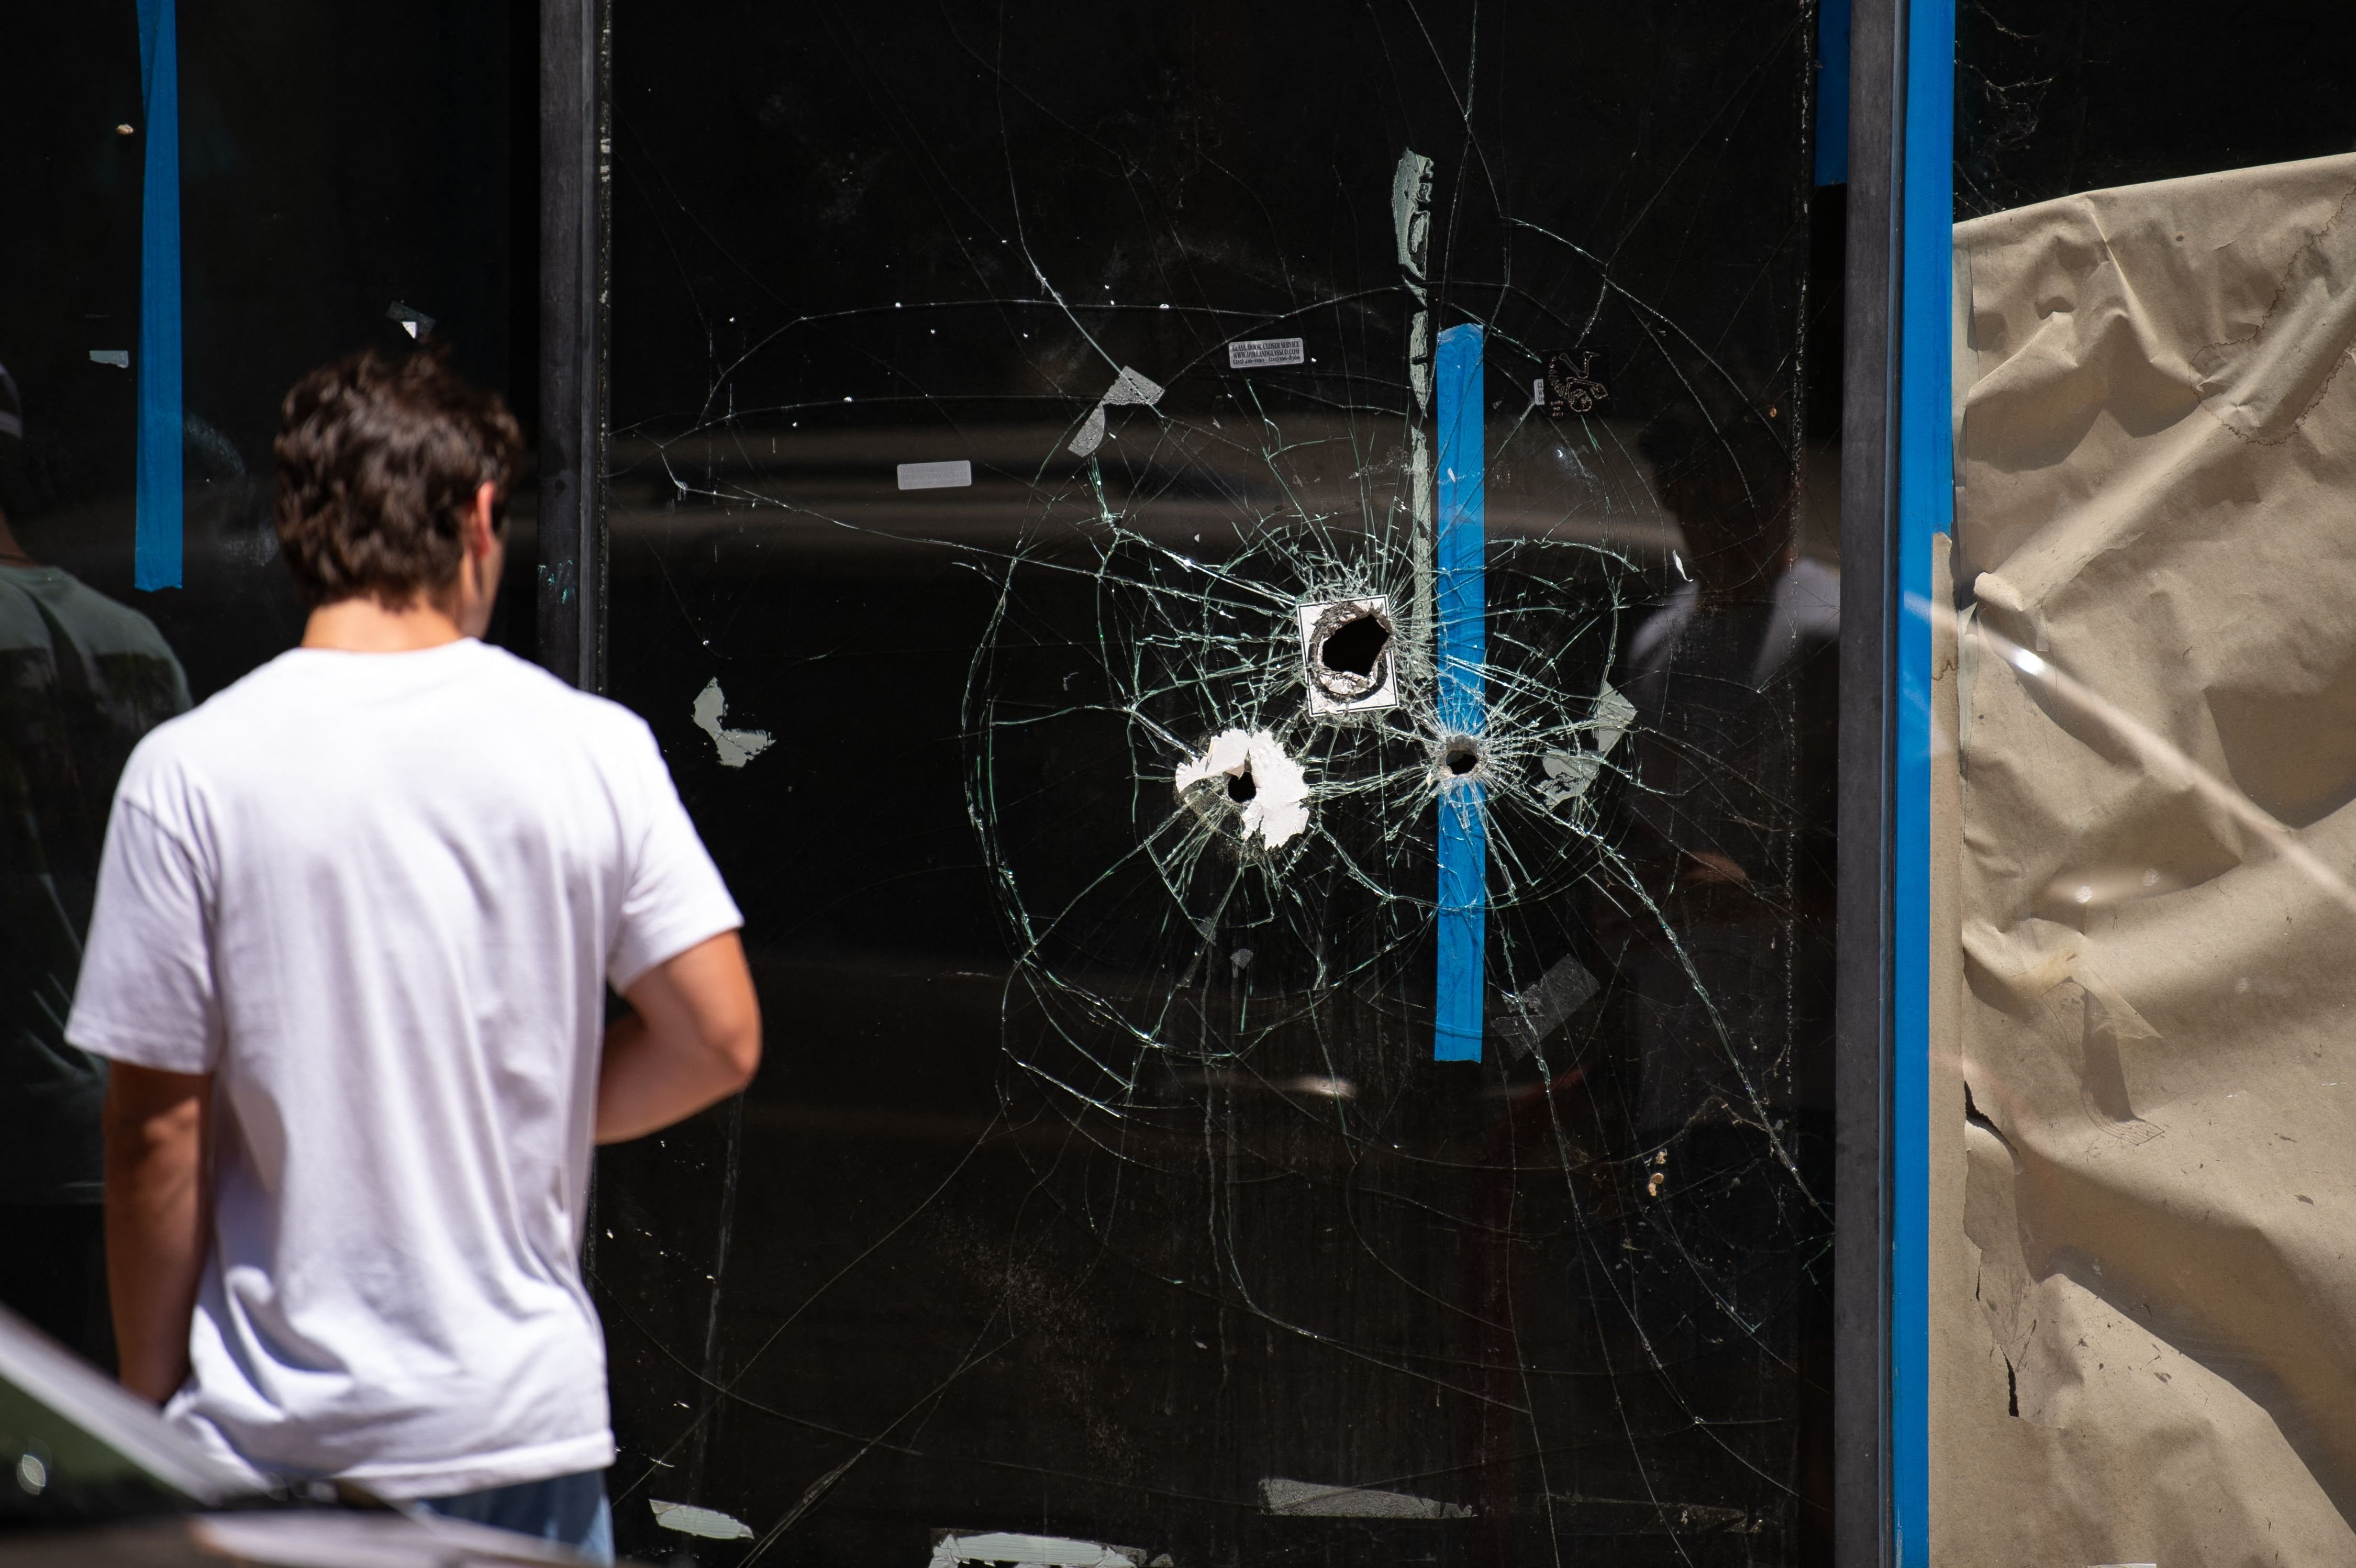 A pedestrian walks past bullet holes in the window of a storefront on South Street in Philadelphia, Pennsylvania, June 5, 2022. (Photo by Kriston Jae Bethel / AFP)